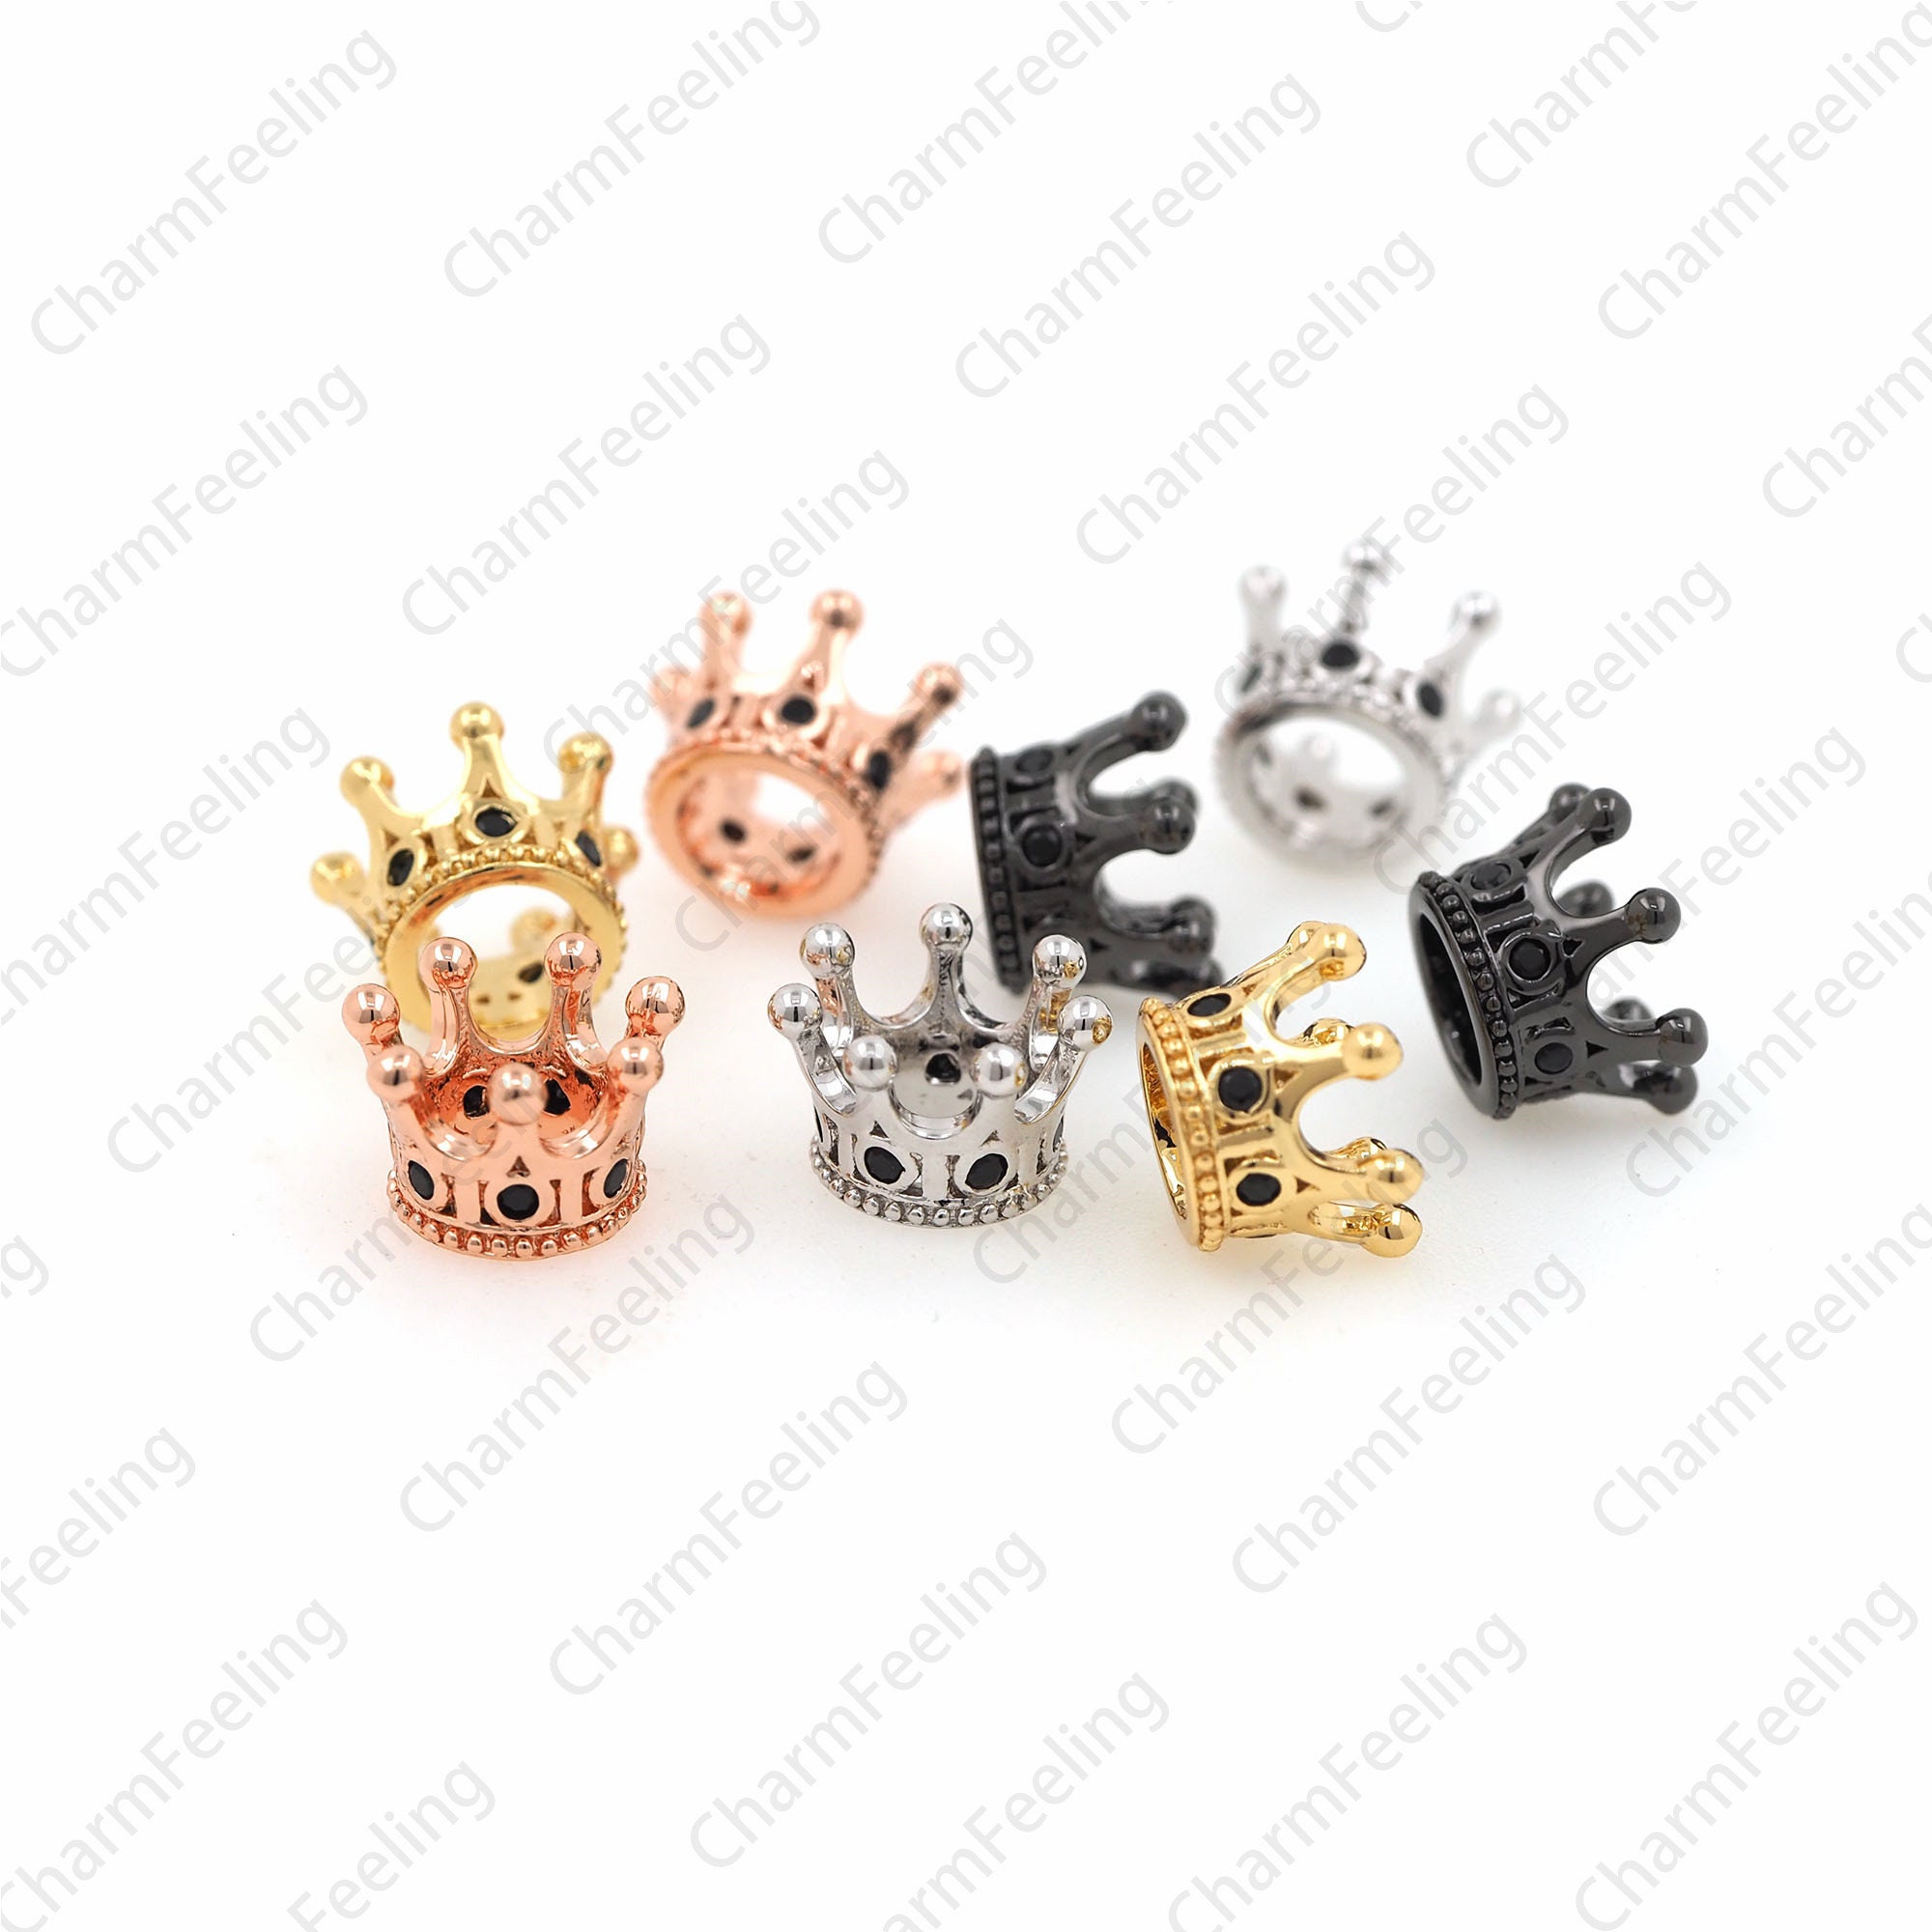 Cz Black Crown Beads, Gold Beads, King Beads, Crown Accessory 11 7mm Hole 5mm 1Pcs